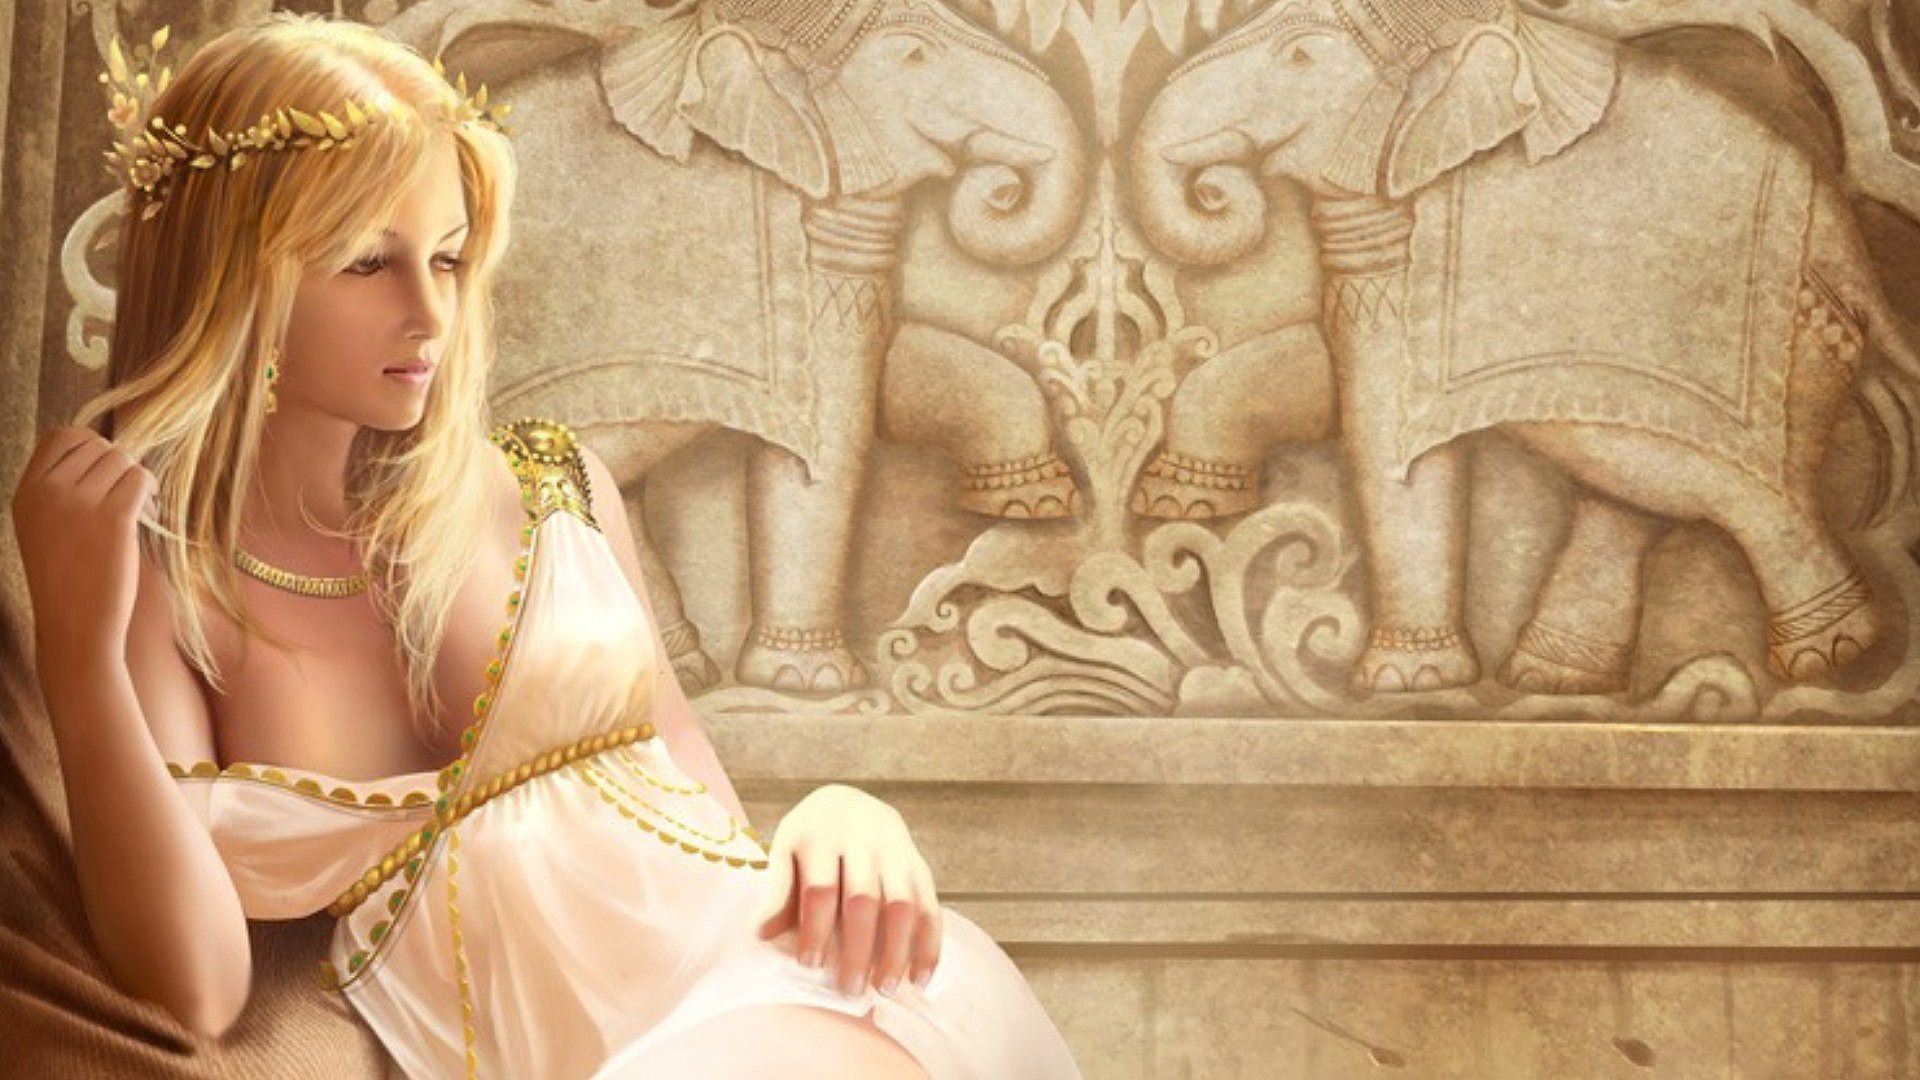 Prostitutes in ancient times wore blonde hair